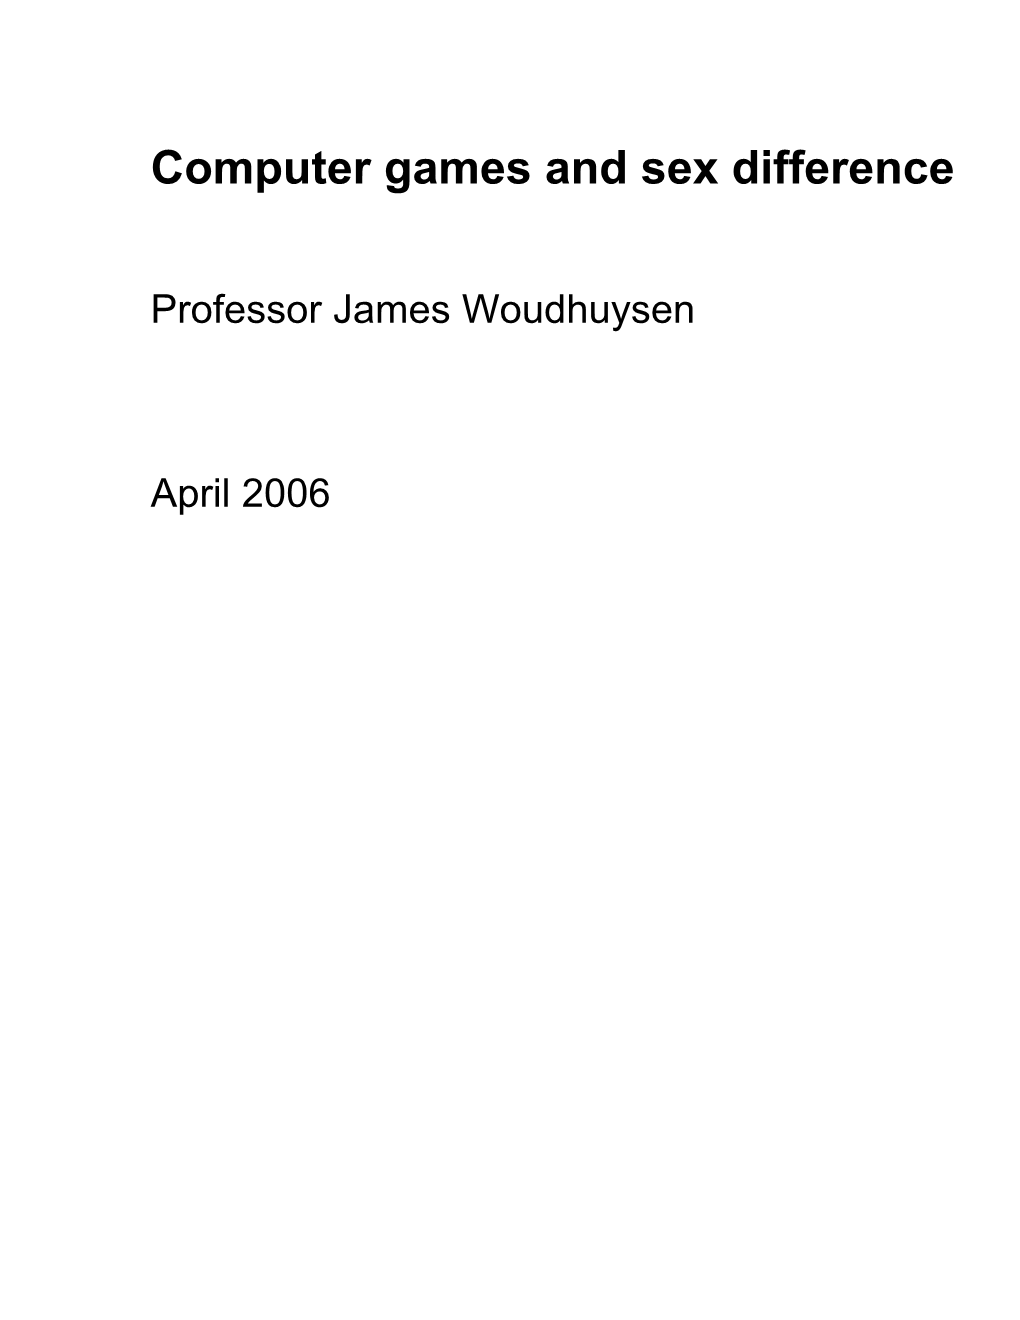 Computer Games and Sex Difference